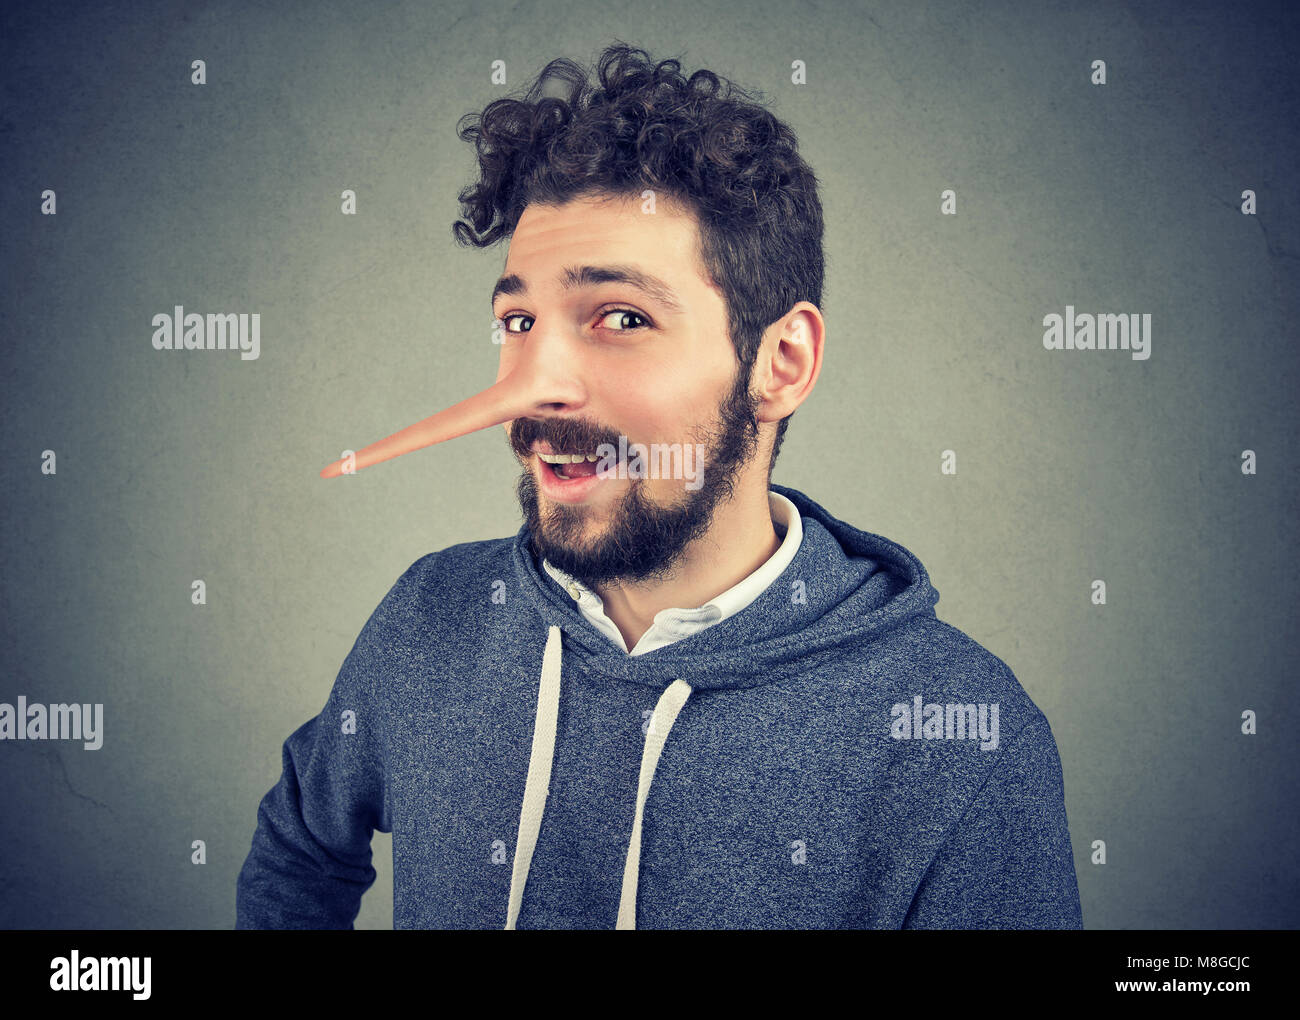 Liar man with long nose isolated on gray background. Human emotions, feelings. Stock Photo